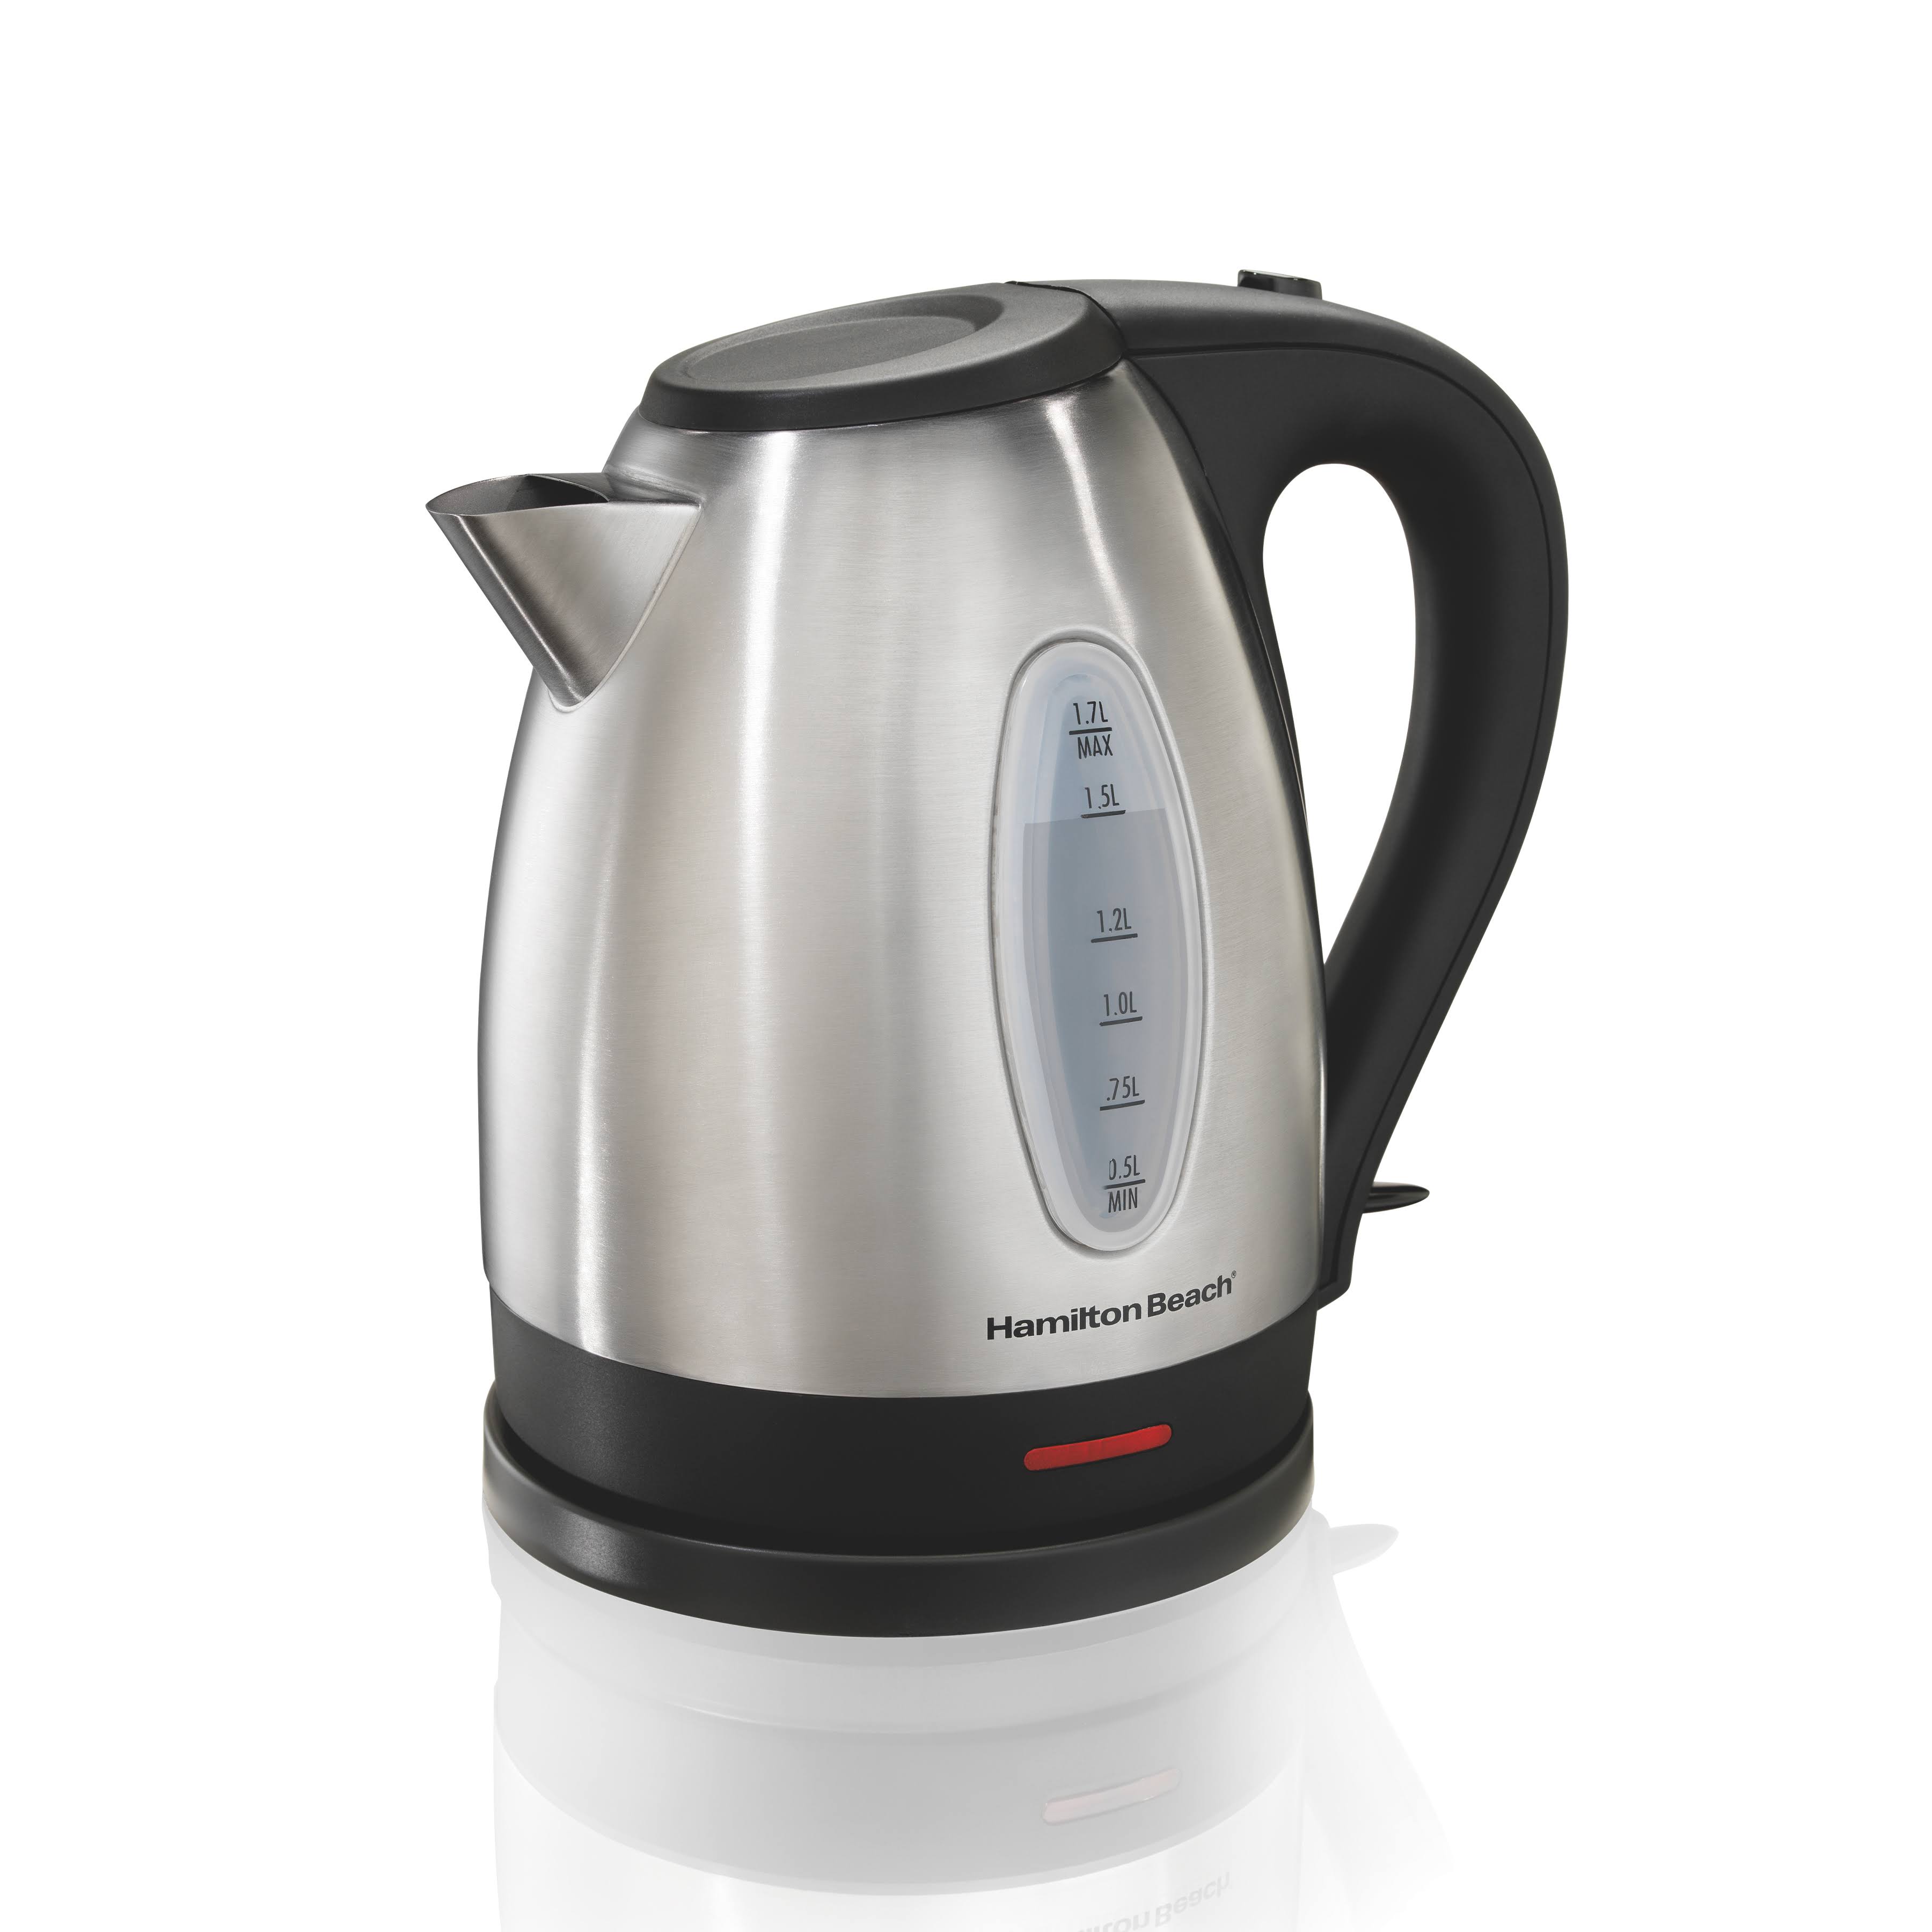 Hamilton Beach Electric Kettle - Stainless Steel, 1.7l